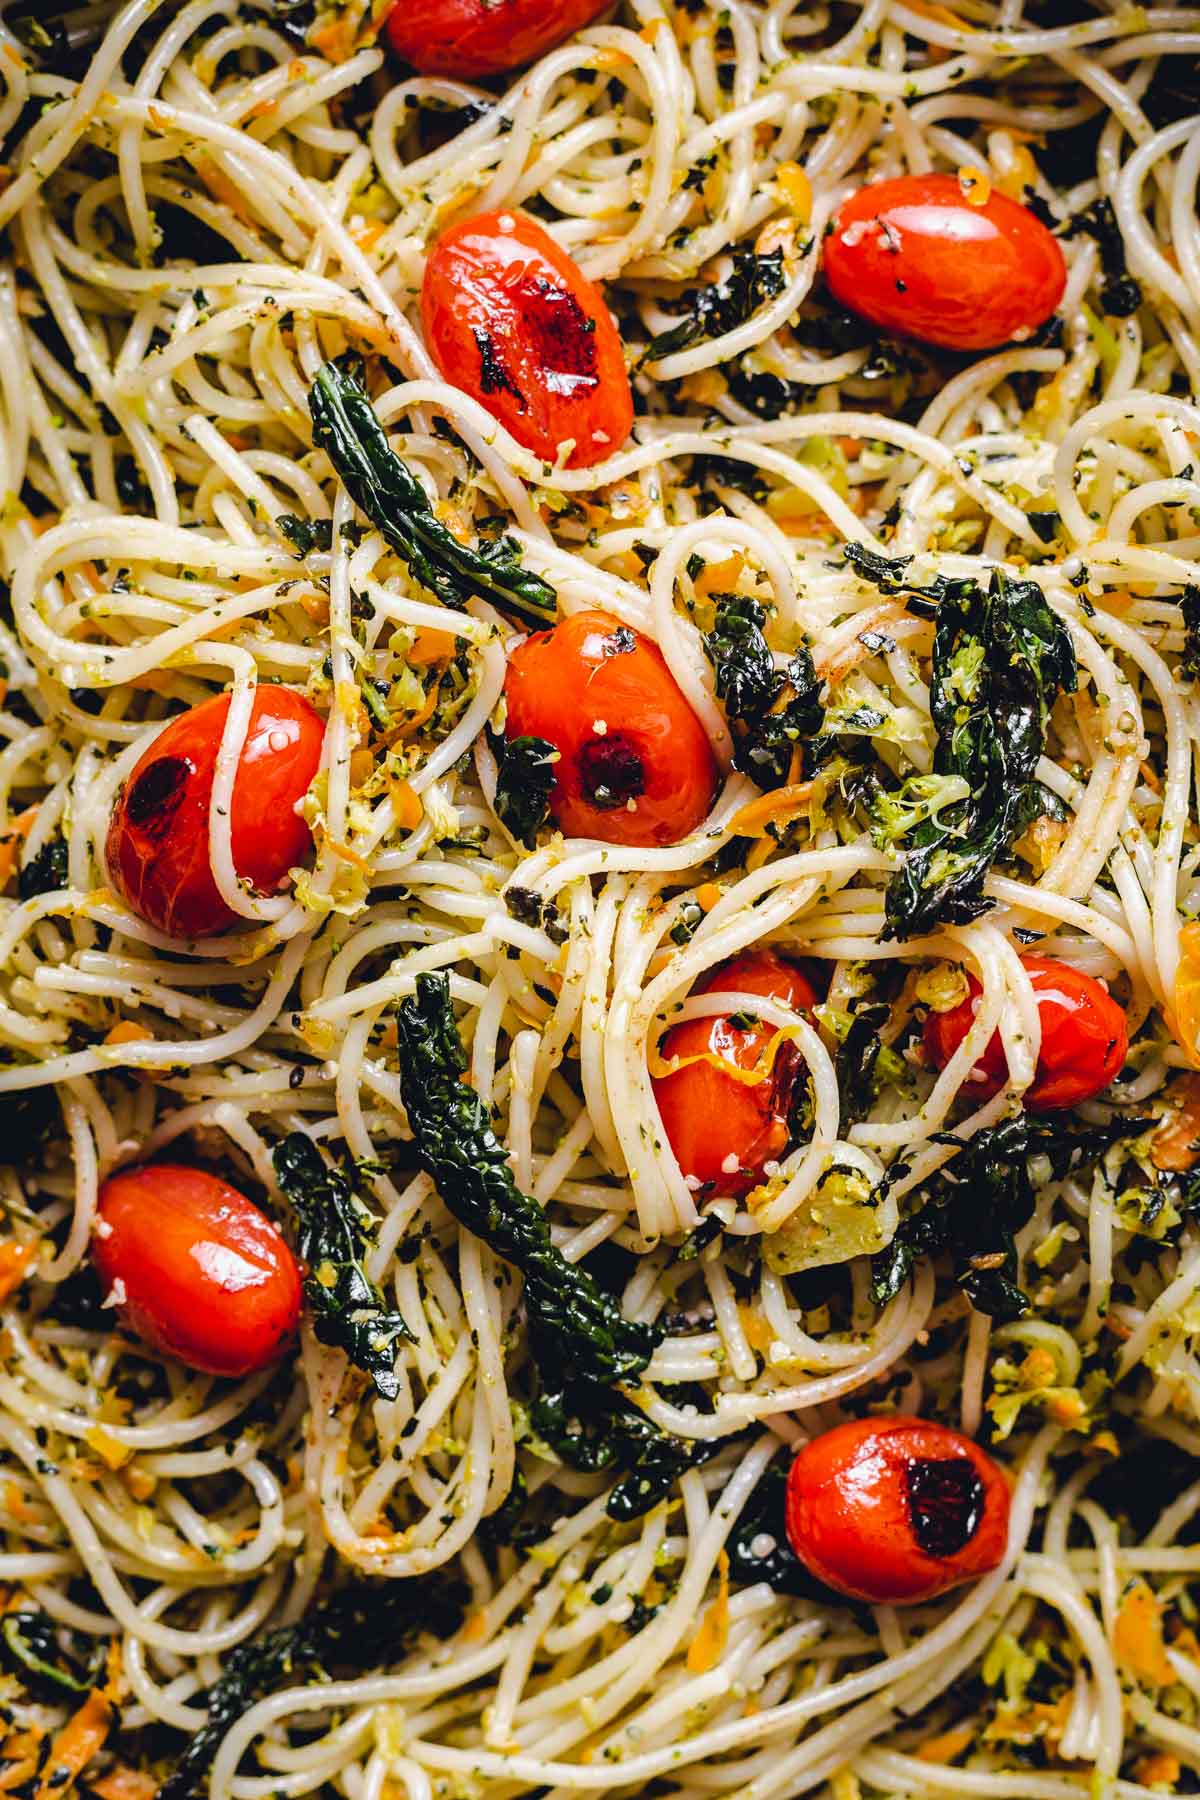 A close-up image of vegan spaghetti with Tuscan kale & tomatoes.